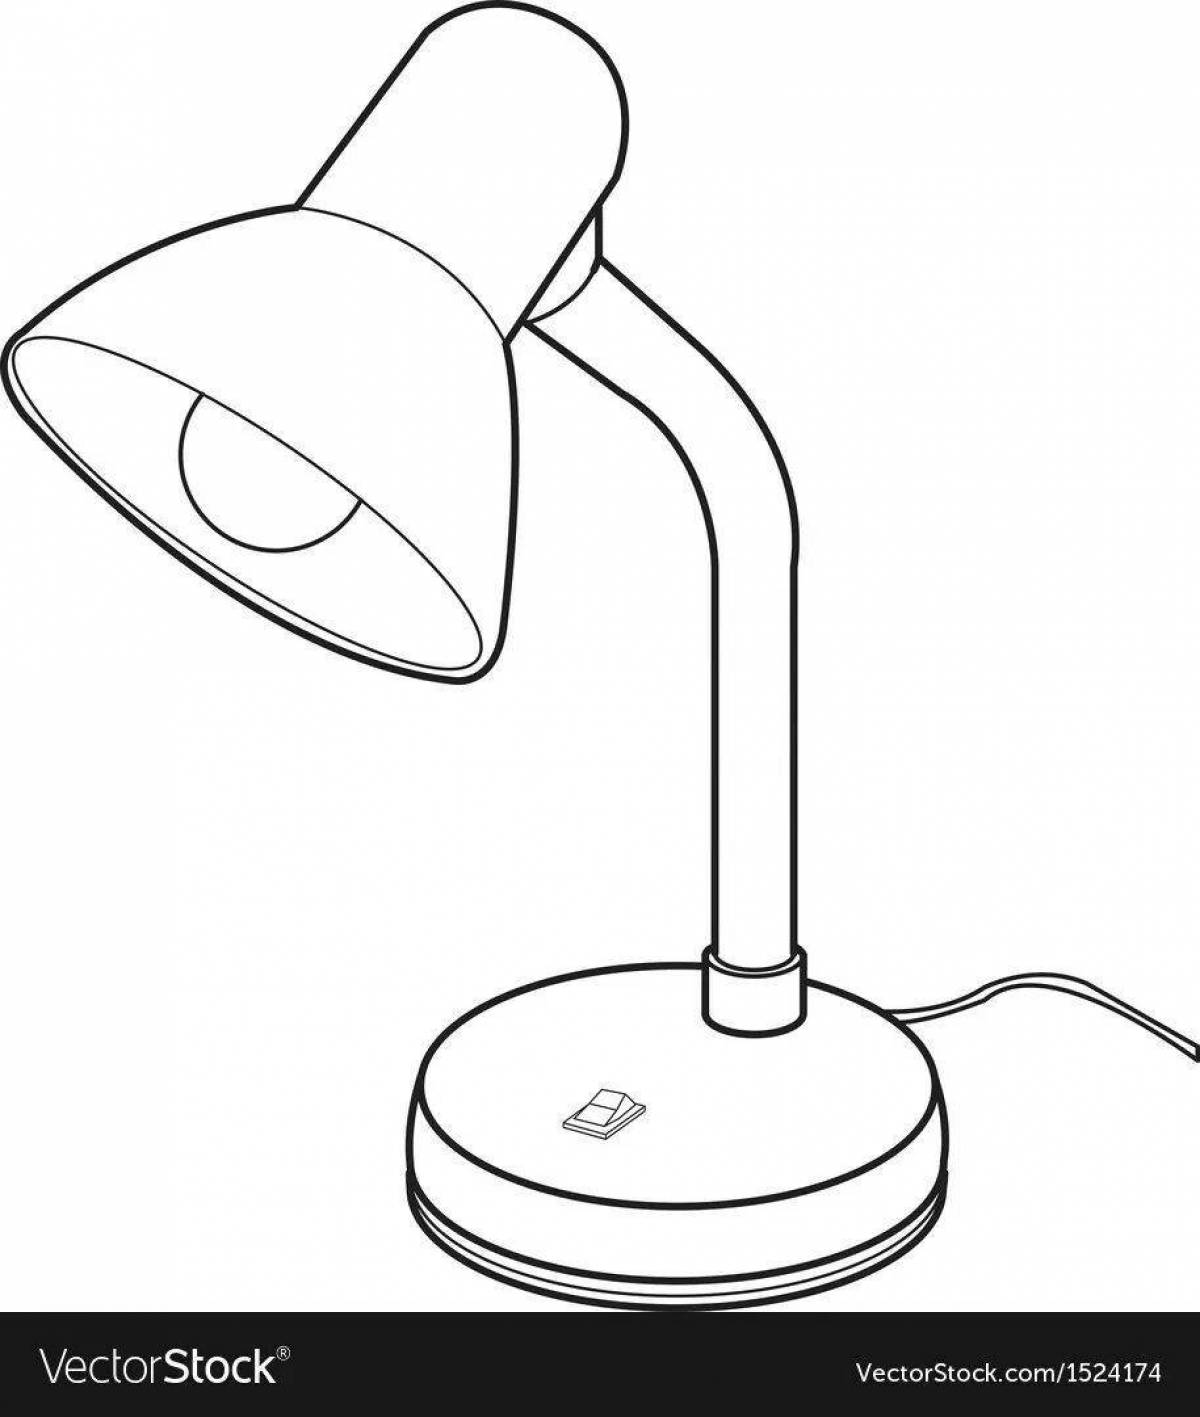 Sublime night light coloring page